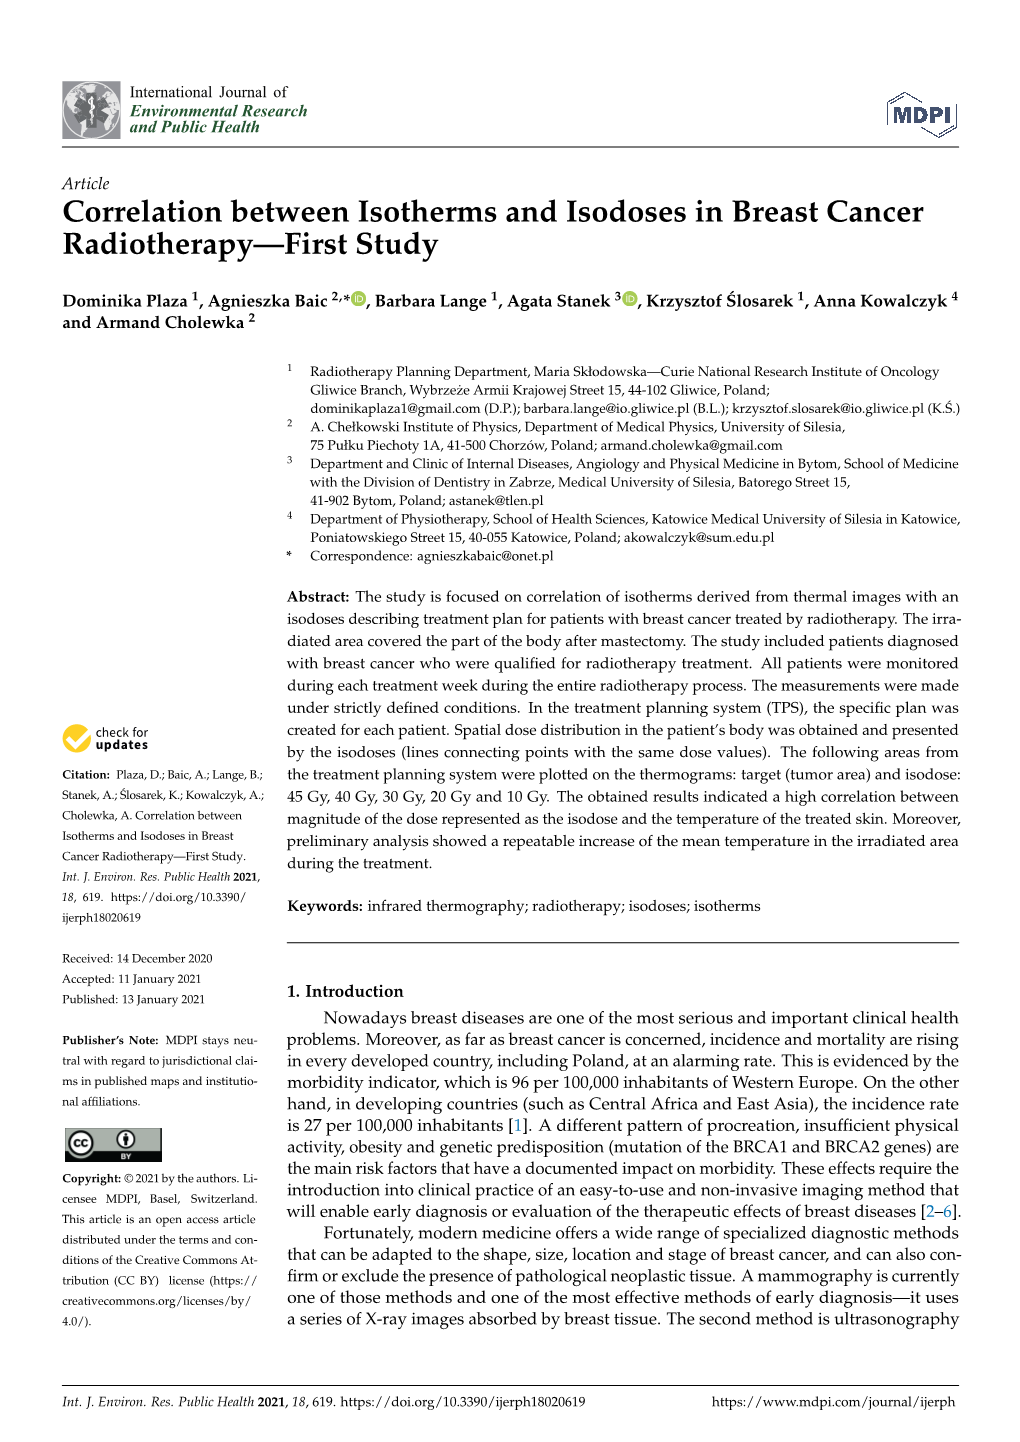 Correlation Between Isotherms and Isodoses in Breast Cancer Radiotherapy—First Study